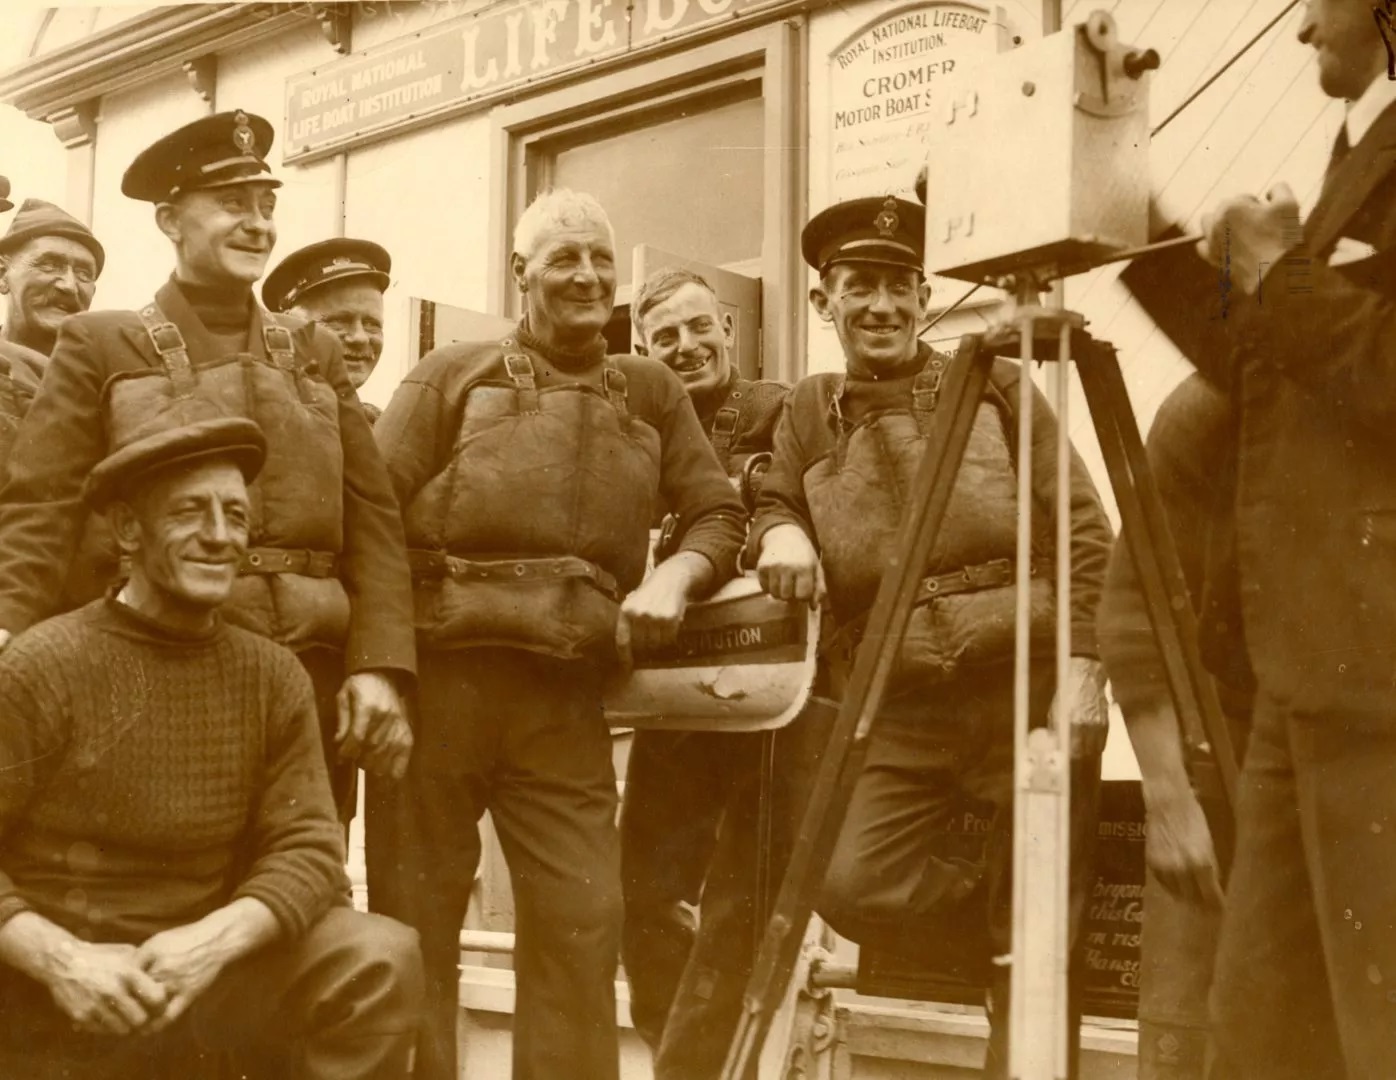 Sepia photo of lifeboat crew circa early 20th century